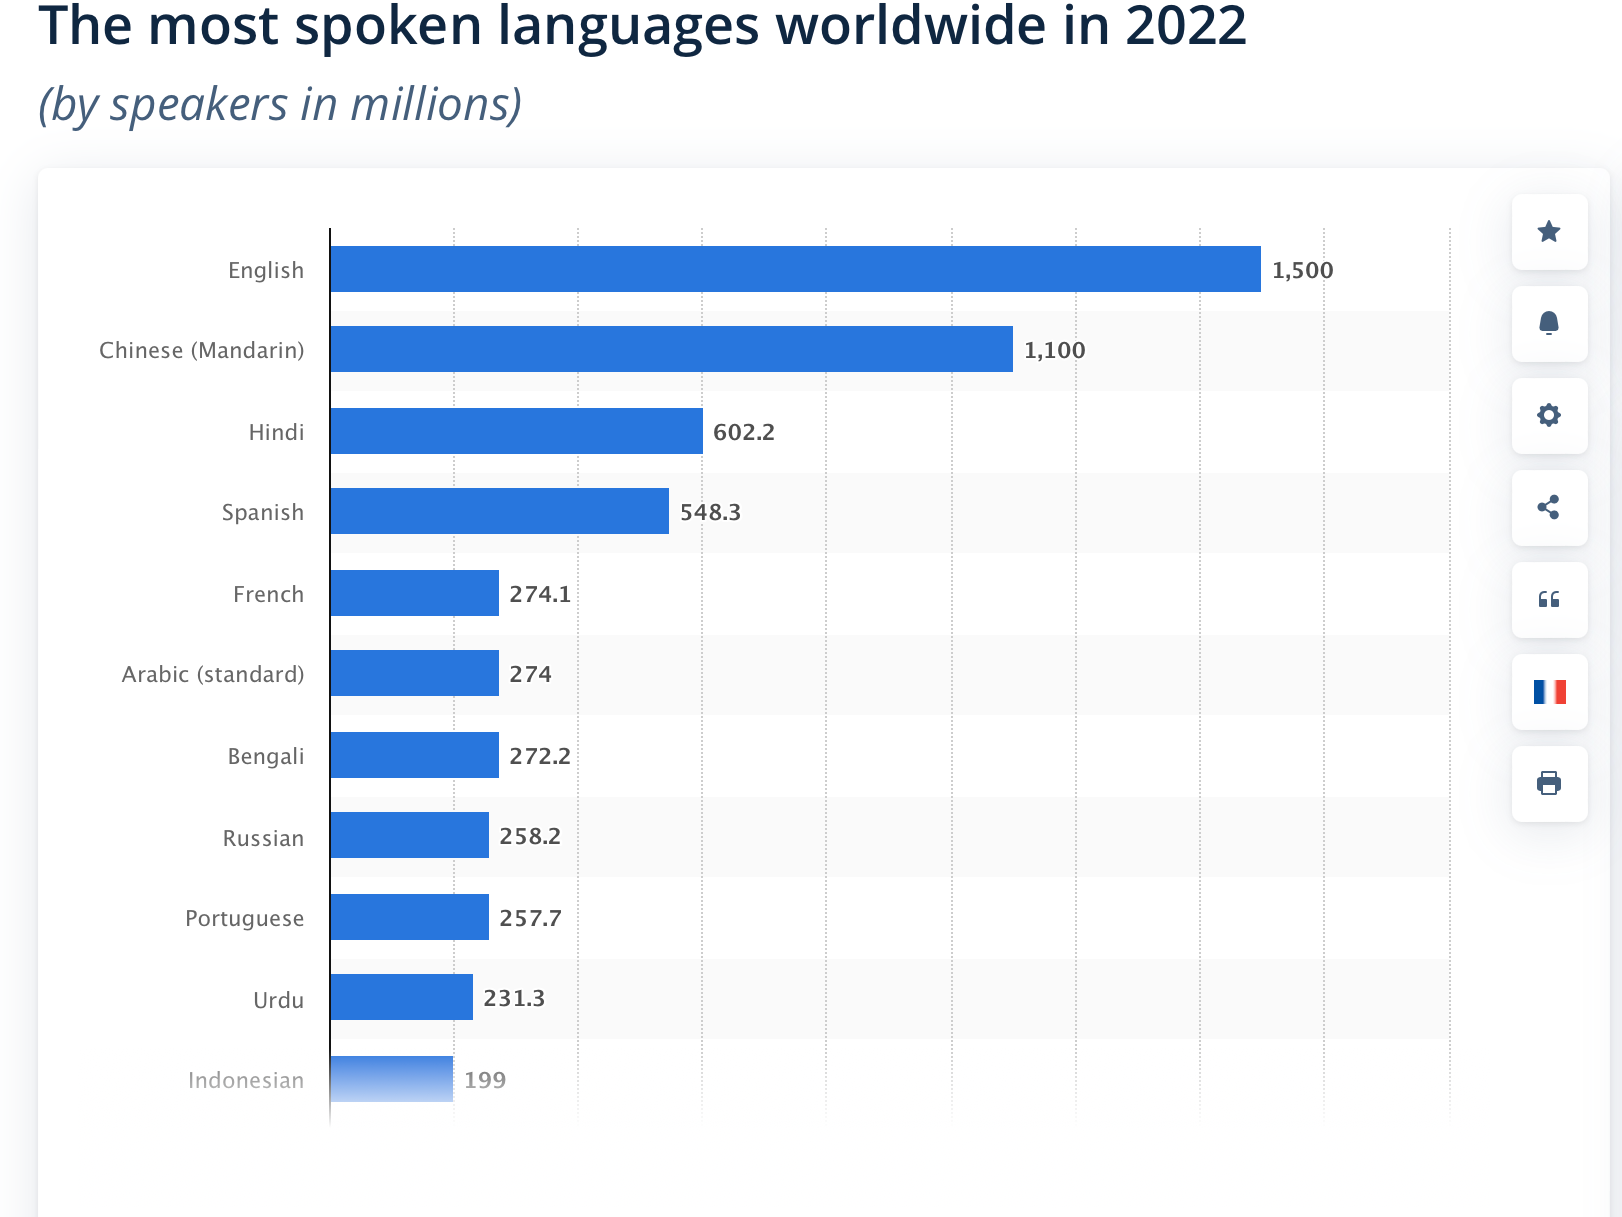 A bar chart showing the most spoken languages by millions.